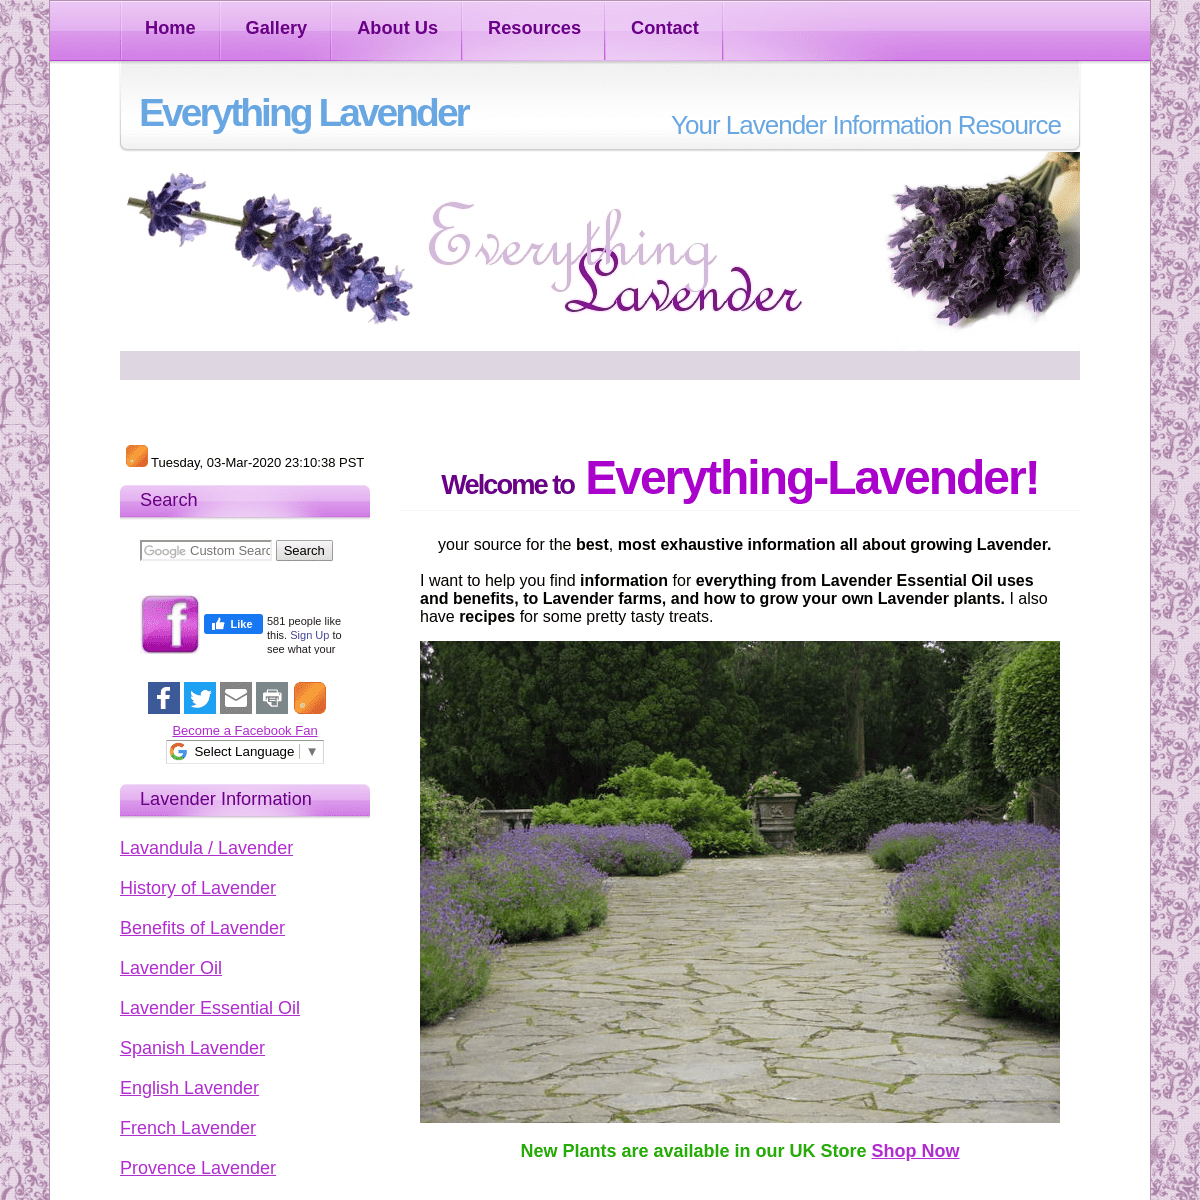 A complete backup of everything-lavender.com